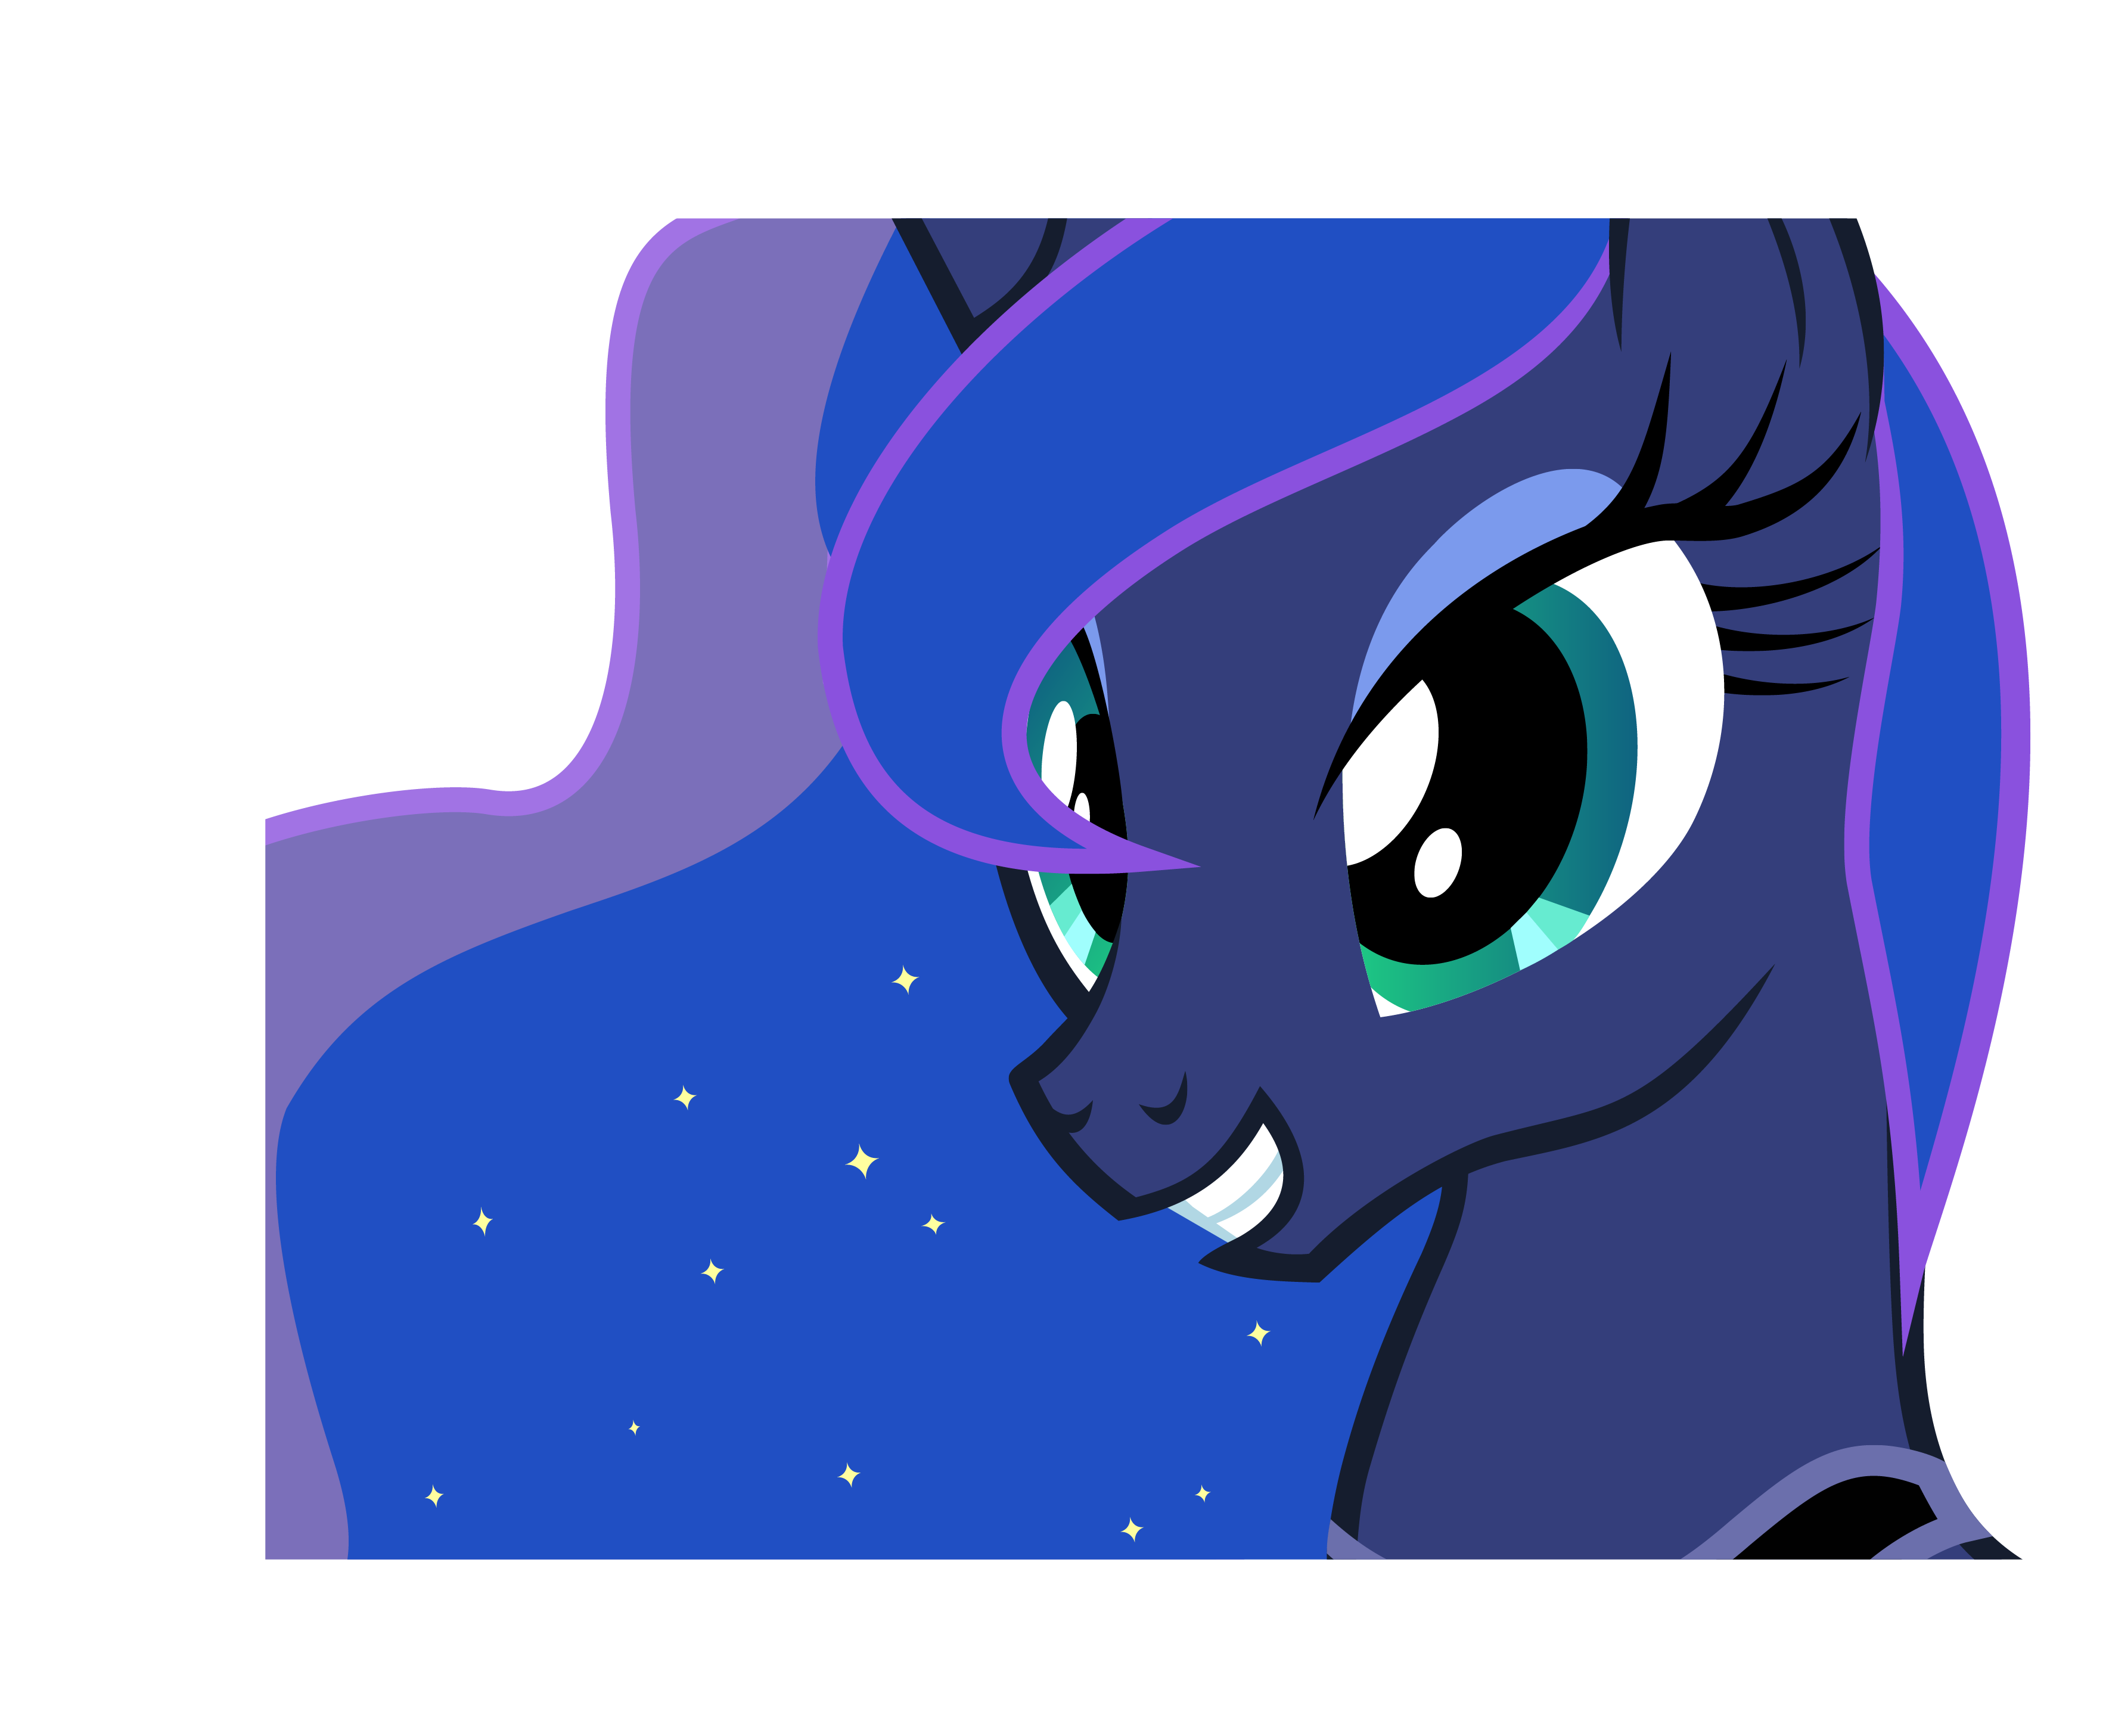 luna_smiling_to_somebody_by_sunran80-d5oncog.png